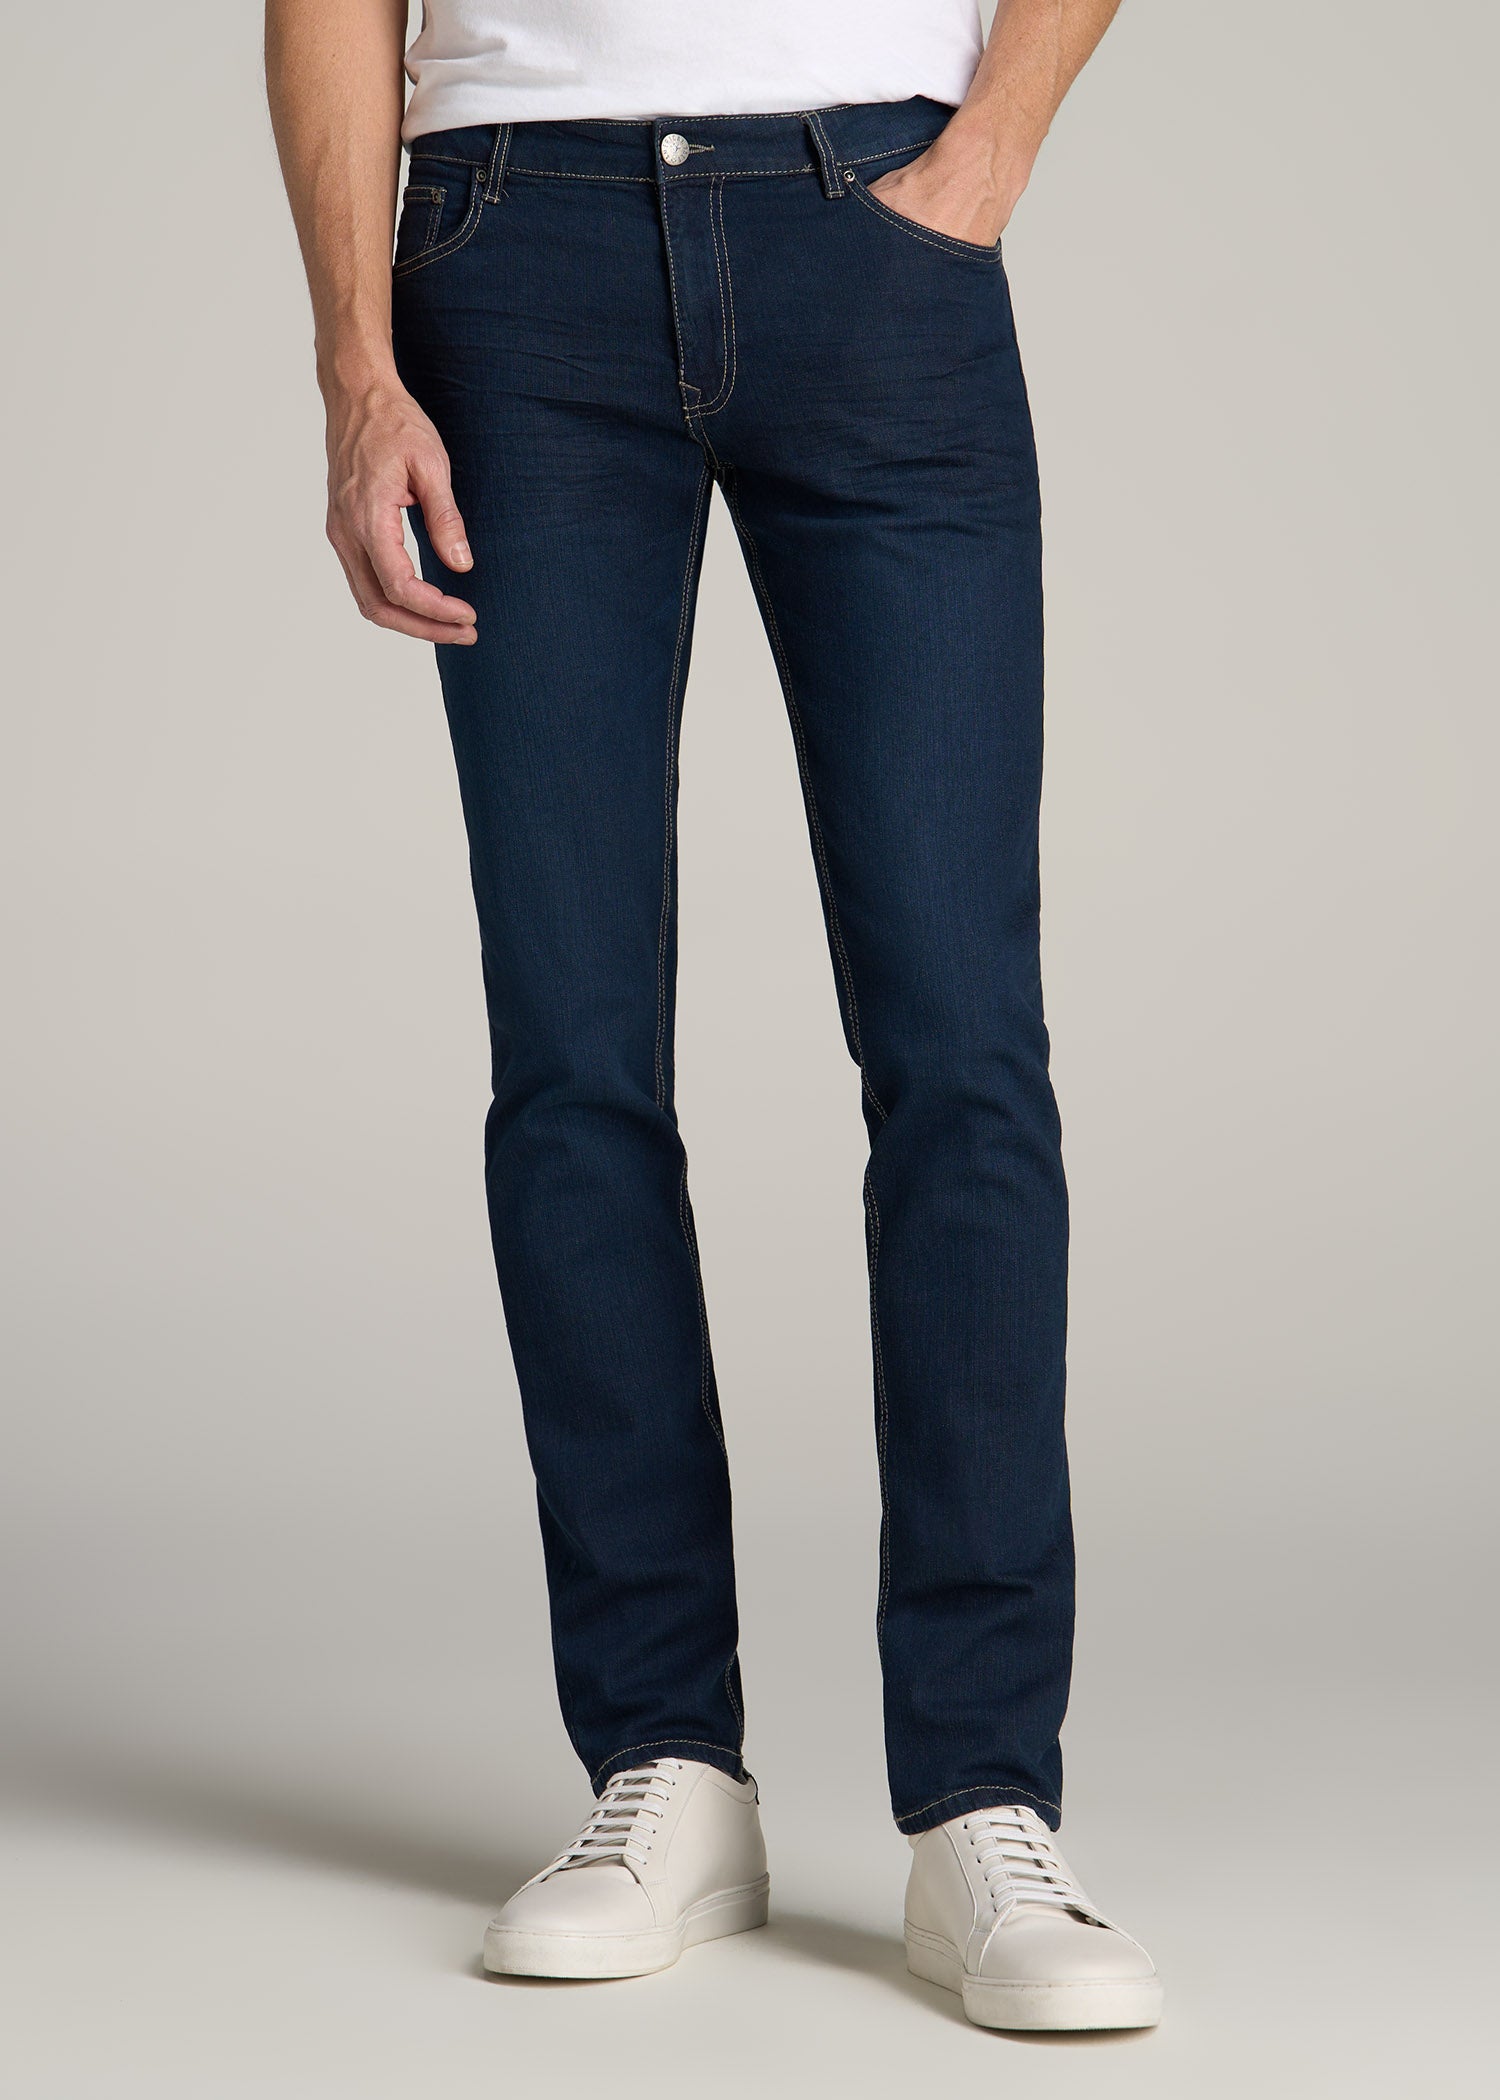 Carman Tapered Jeans For Tall Men Blue-Steel | American Tall